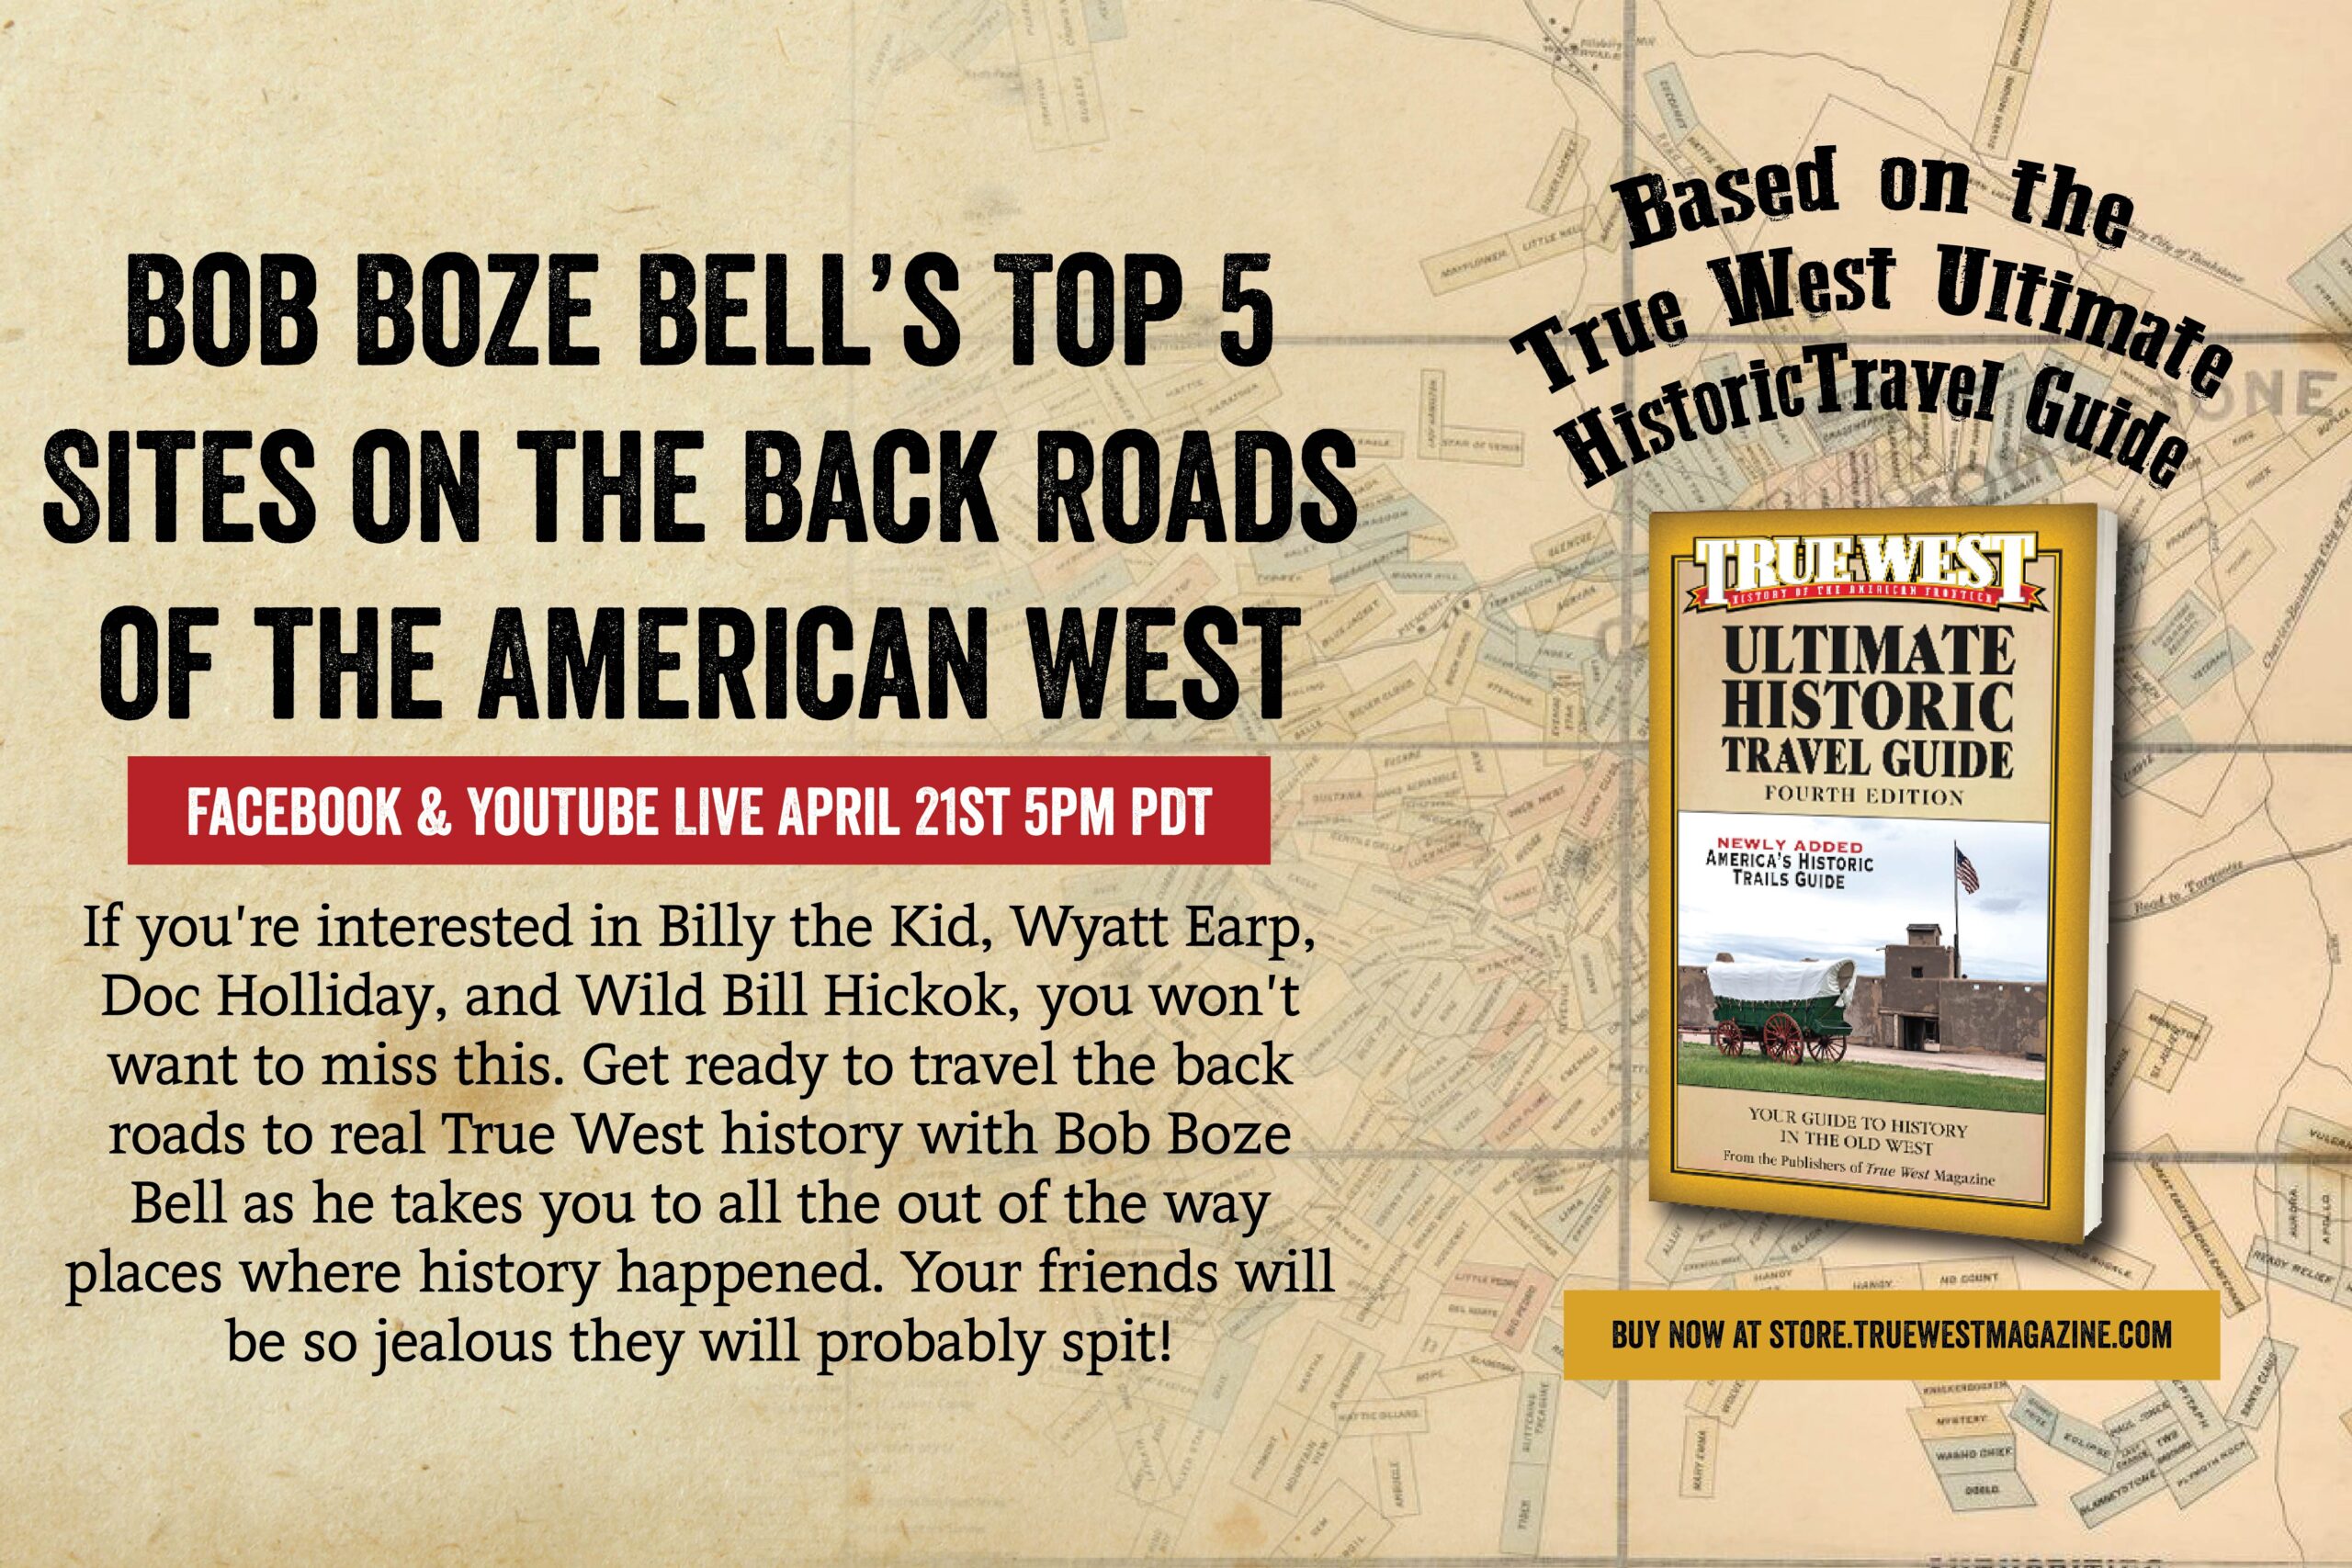 Bob Boze Bell’s Top 5 Sites on the Back Roads of the American West